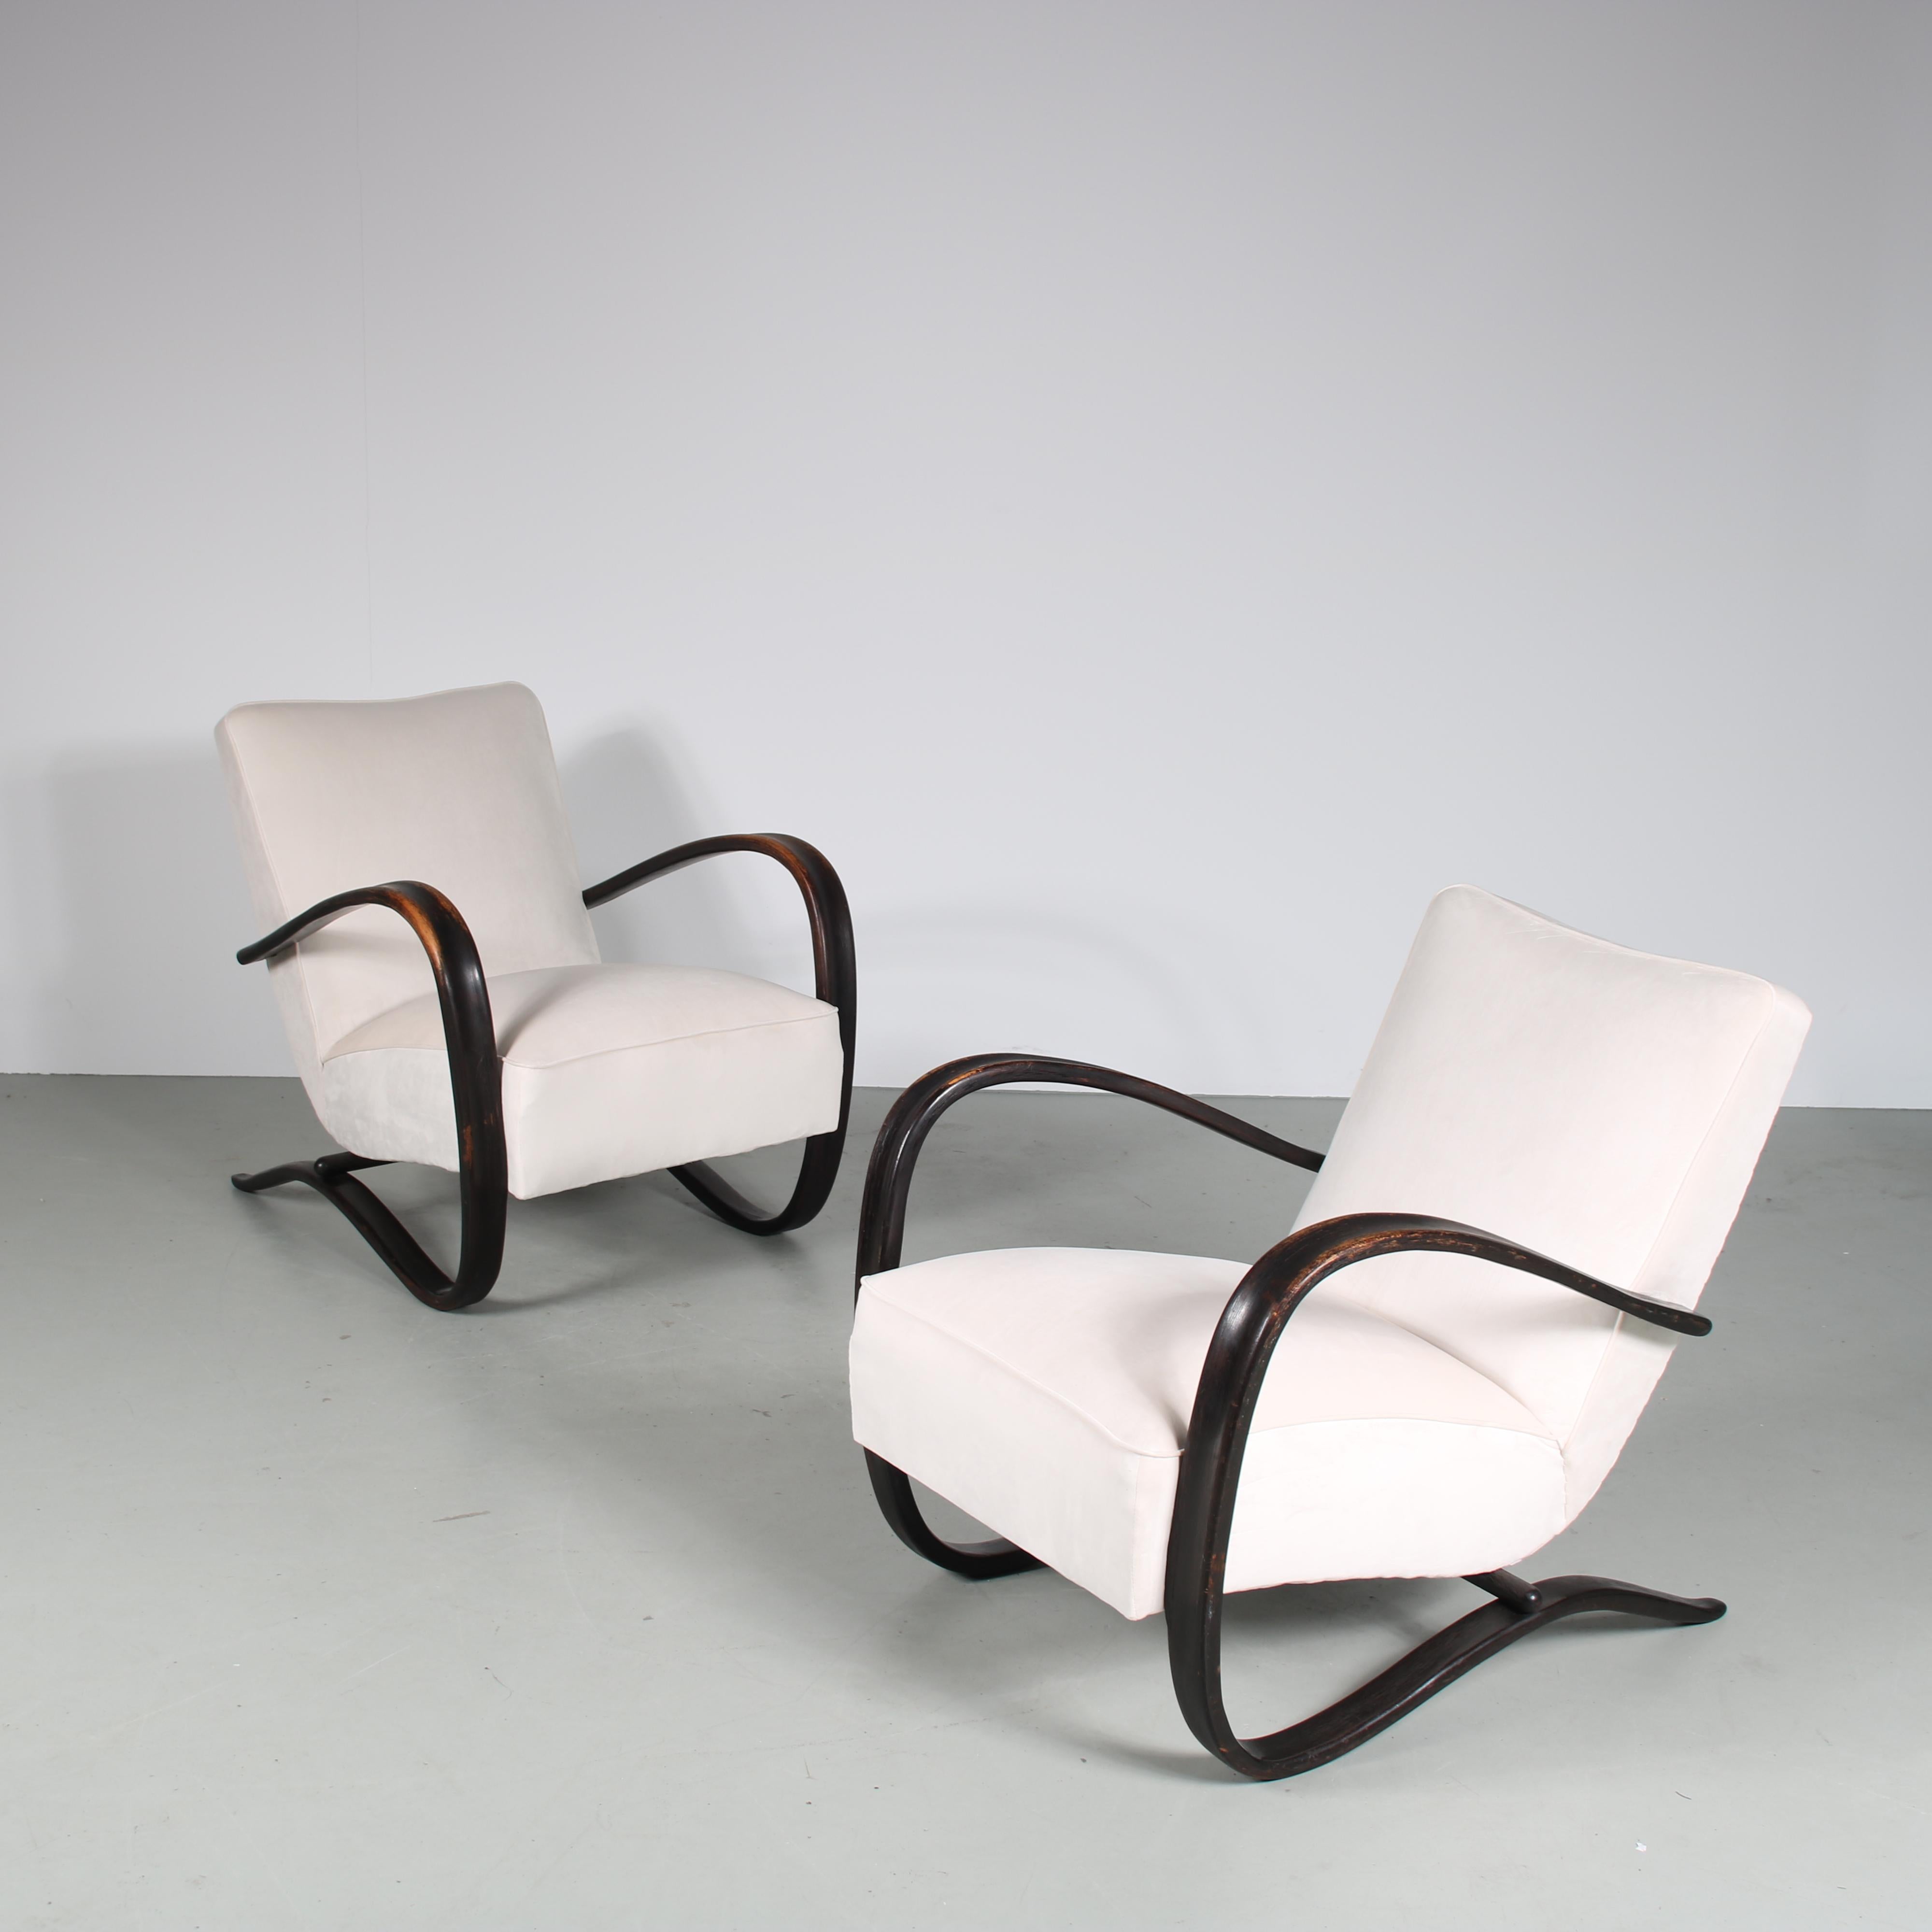 A stunning pair of lounge chairs in eye-catching Czech design by Jindrich Halabala, manufactured by Up Zavody in the Czech Republic around 1930.

These chairs have a beautiful Art Deco style. The very dark wooden curved armrests transition